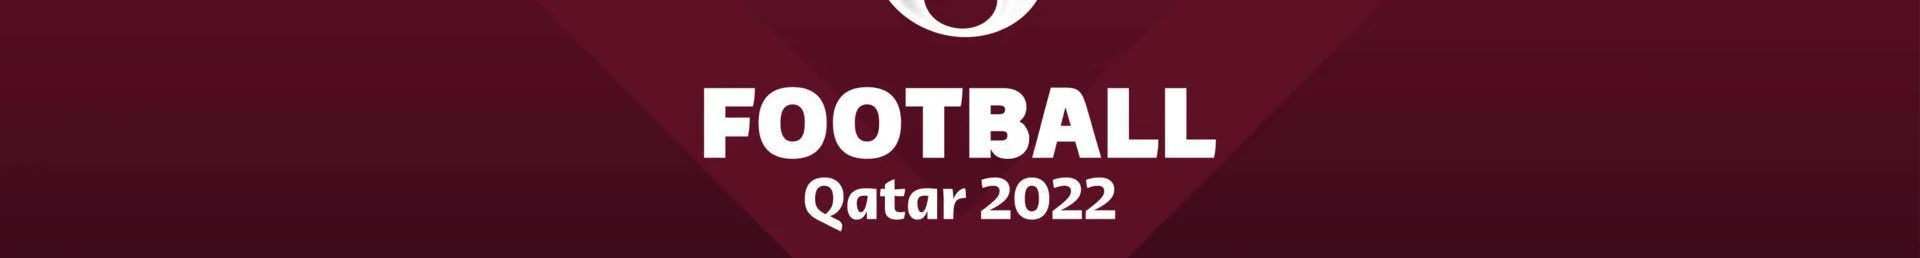 qatar-2022-football-competition-design-not-official-logo-qatar-2022-on-red-burgundy-background-pattern-for-banners-posters-social-media-kit-templates-scoreboard-vector